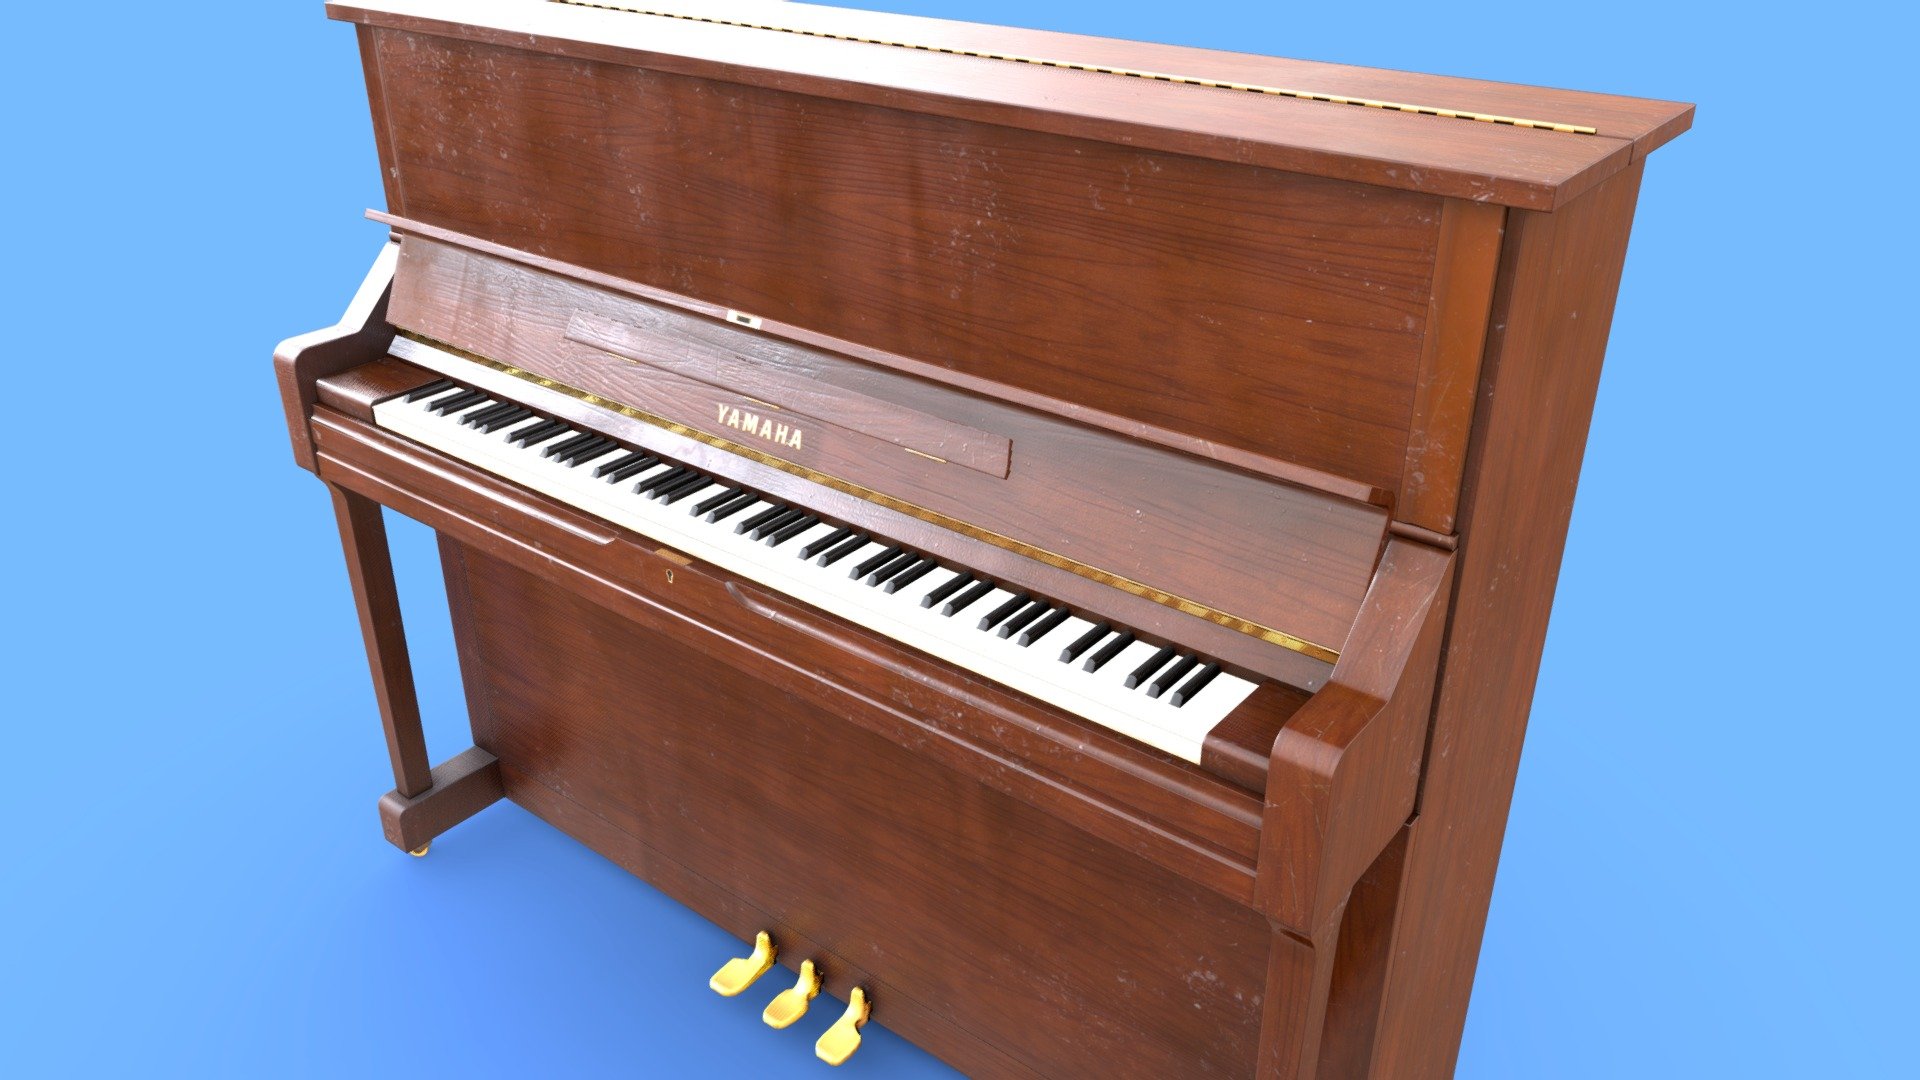 An upright piano created for a comedy club.
4096x textures, 79688 triangles.
This piano can be used in apartments, clubs, bars, on stages and anywhere else you could imagine. It is sure to bring people together, as long as someone knows how to play it 3d model